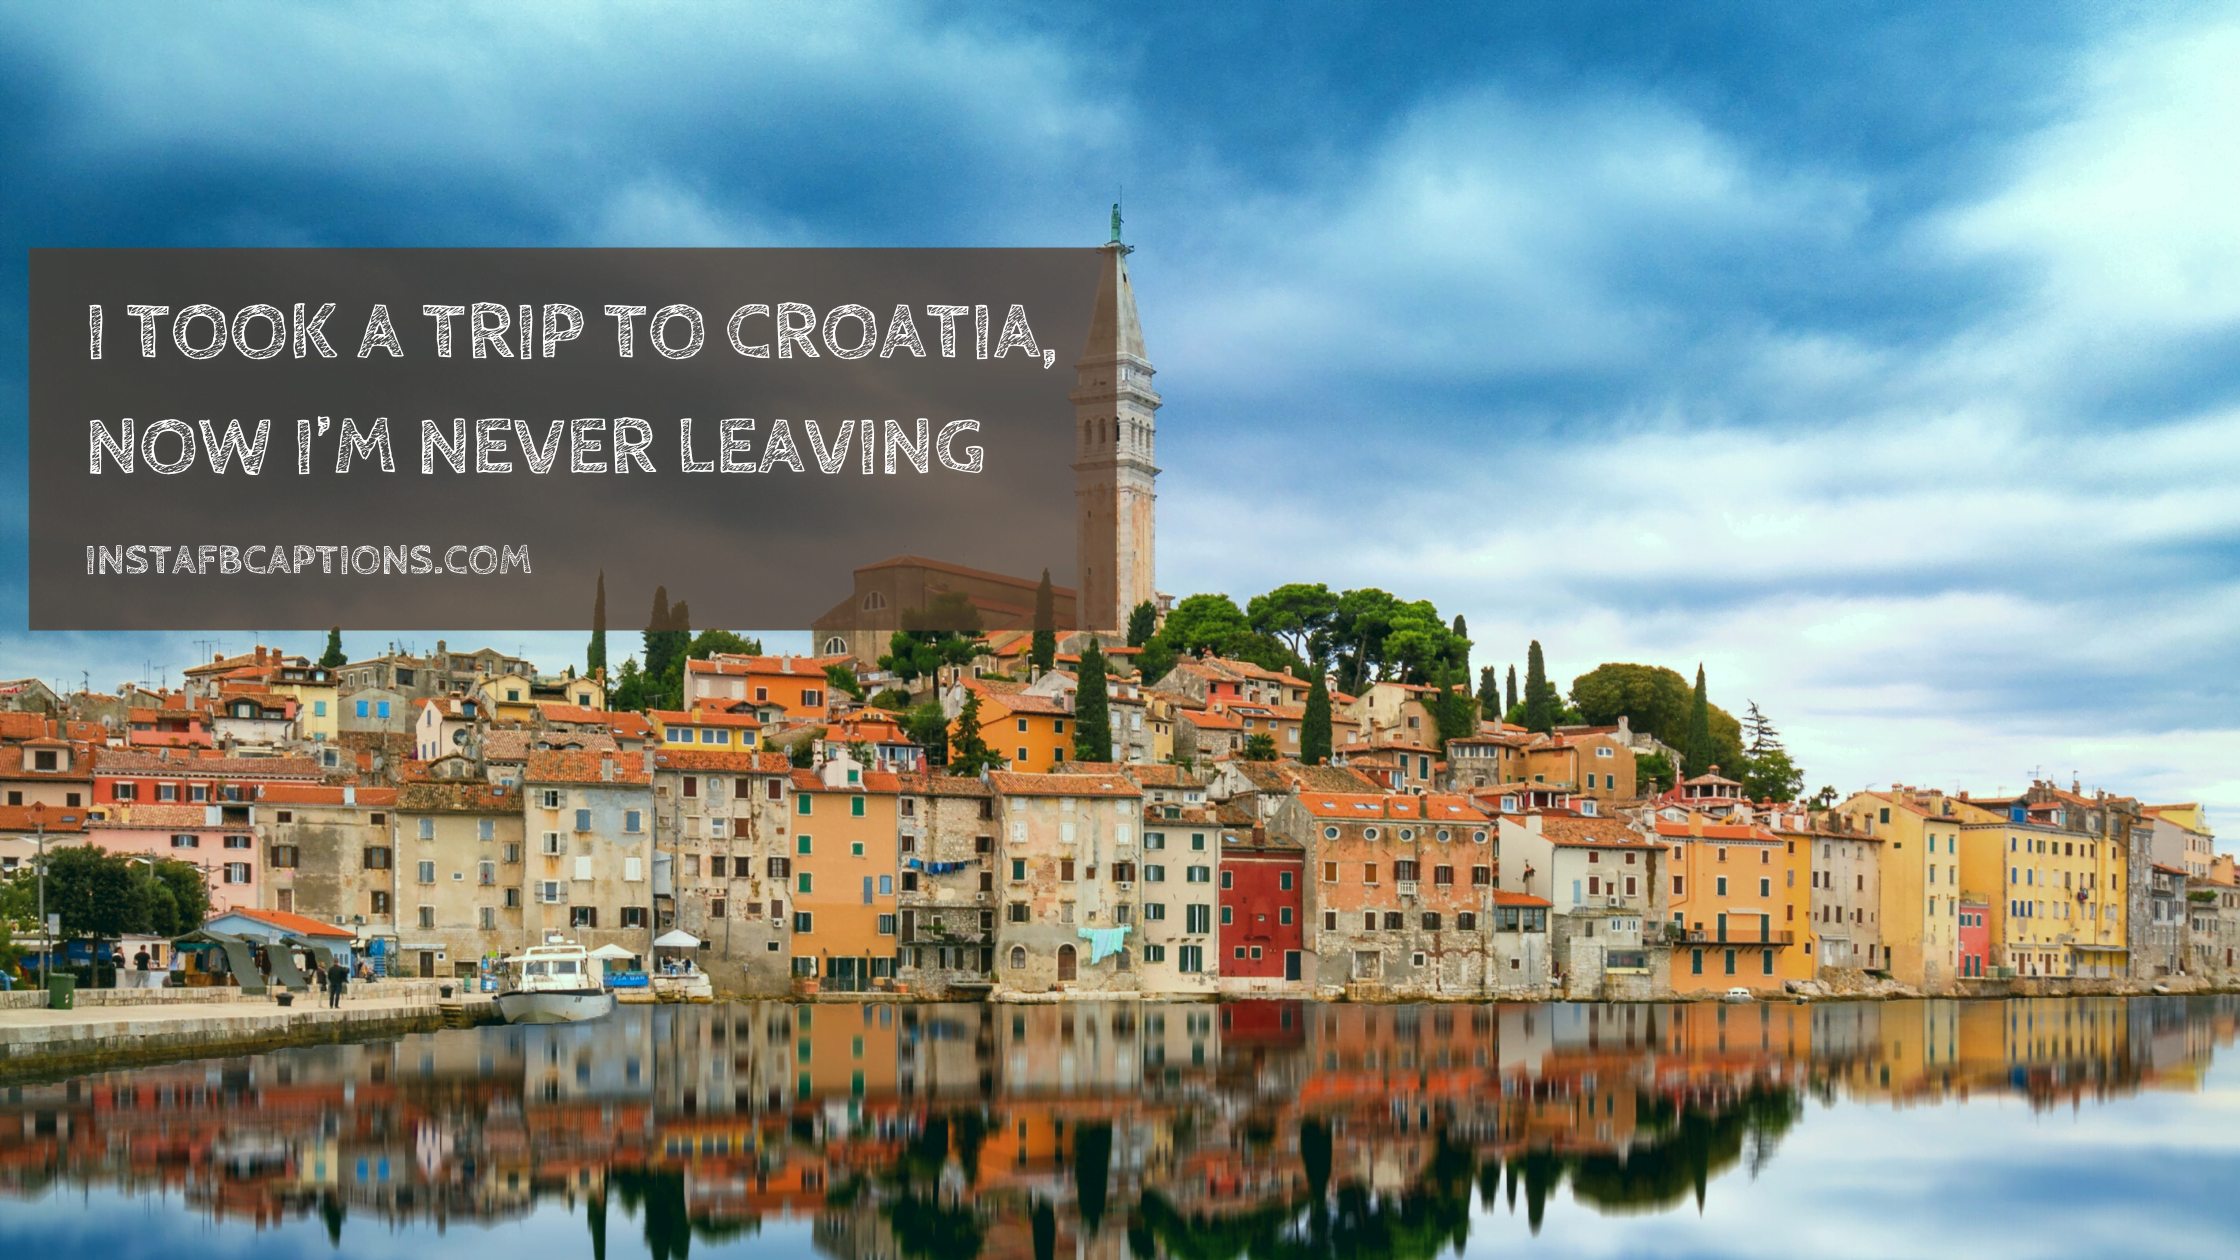 Cute Croatia Captions  - Cute Croatia Captions  - 96 Croatia Instagram Captions for Europe Pics in 2022